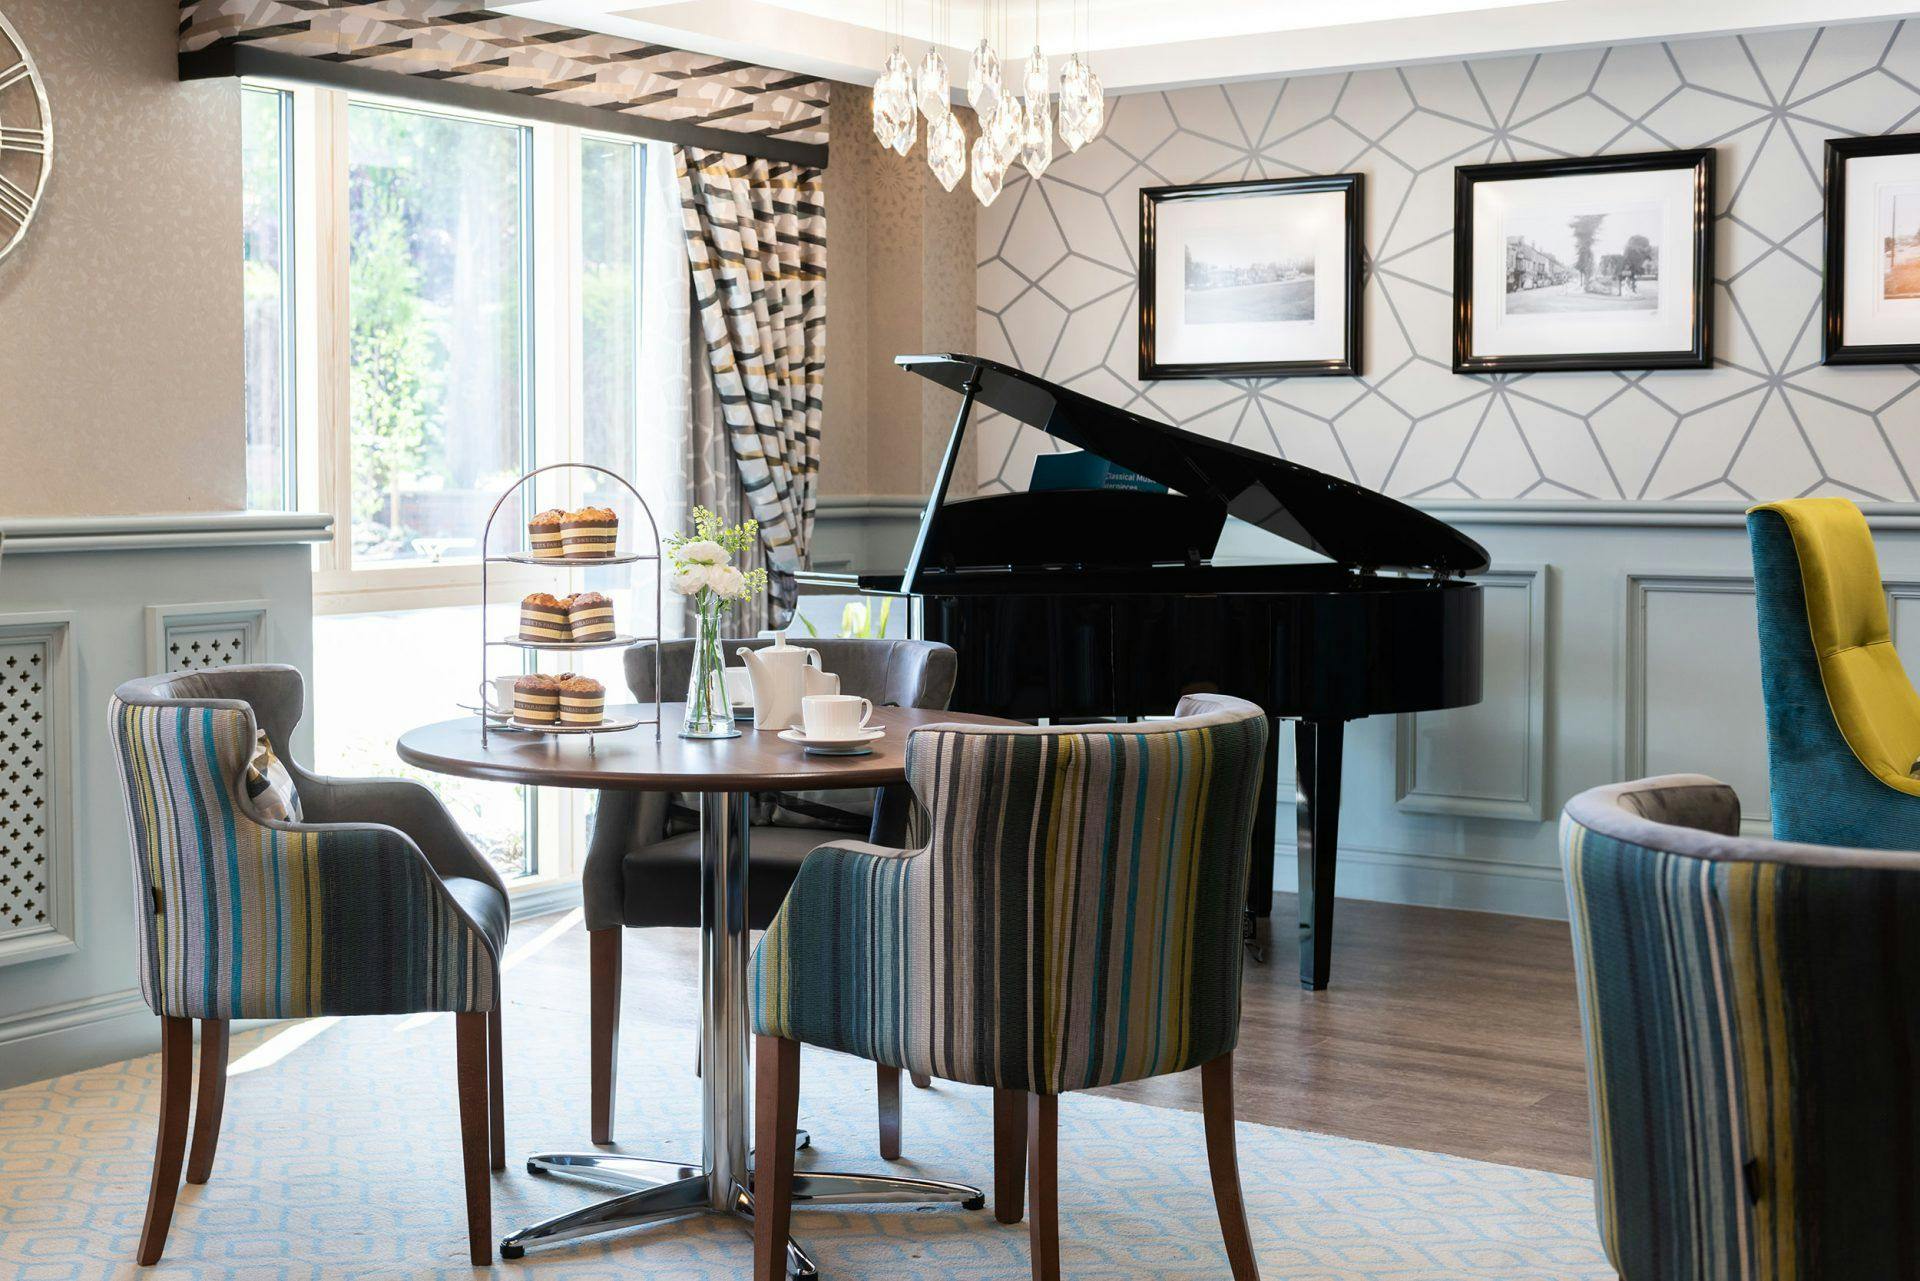 Piano room of Lakeview Grange care home in Chichester, West Sussex